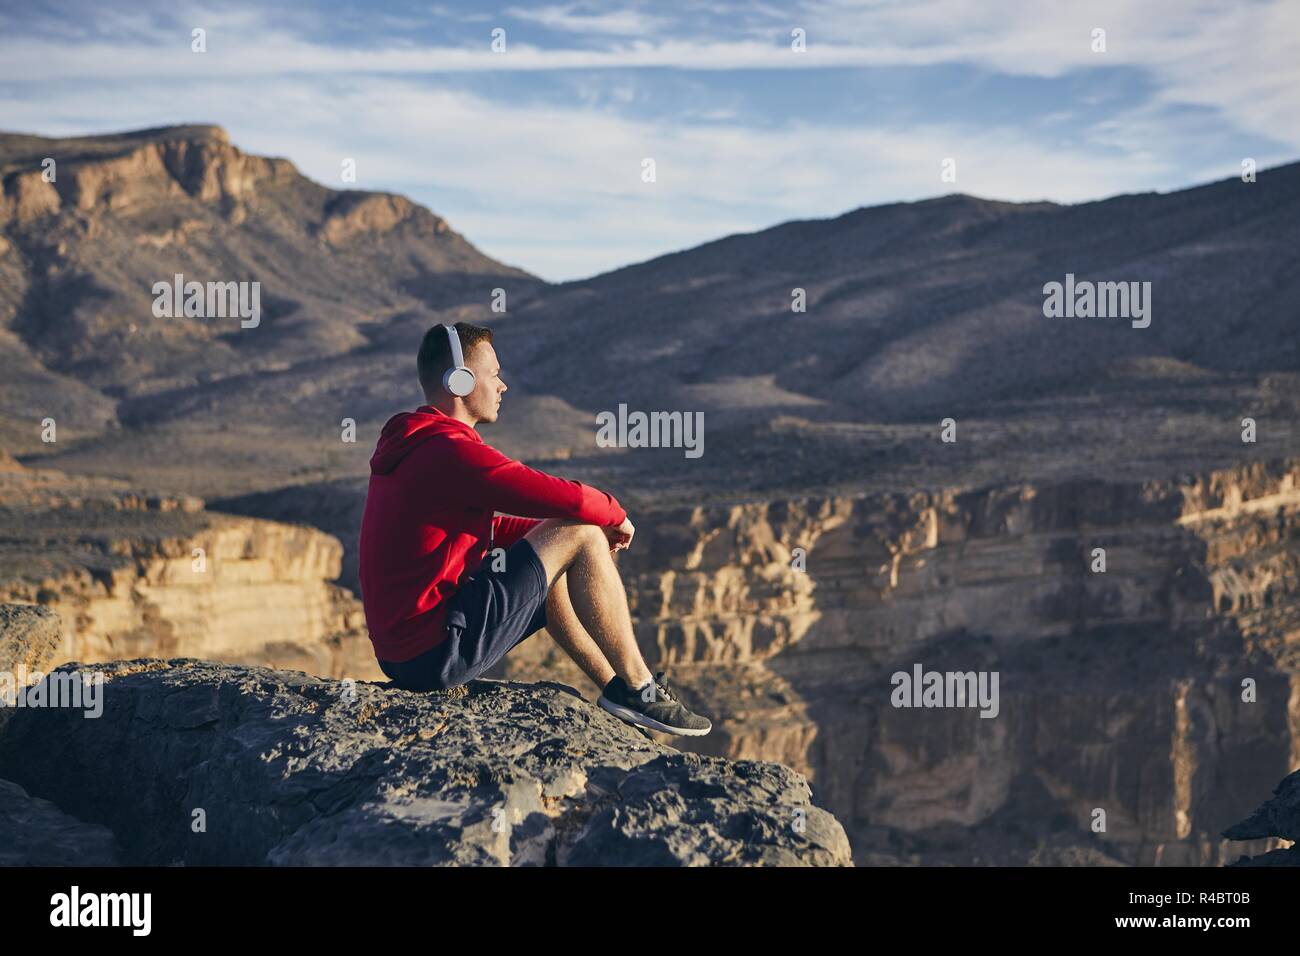 Relaxation in mountains. Young man with headphones sitting on the edge of cliff and listening music. Jebel Akhdar, Grand Canyon of Oman. Stock Photo